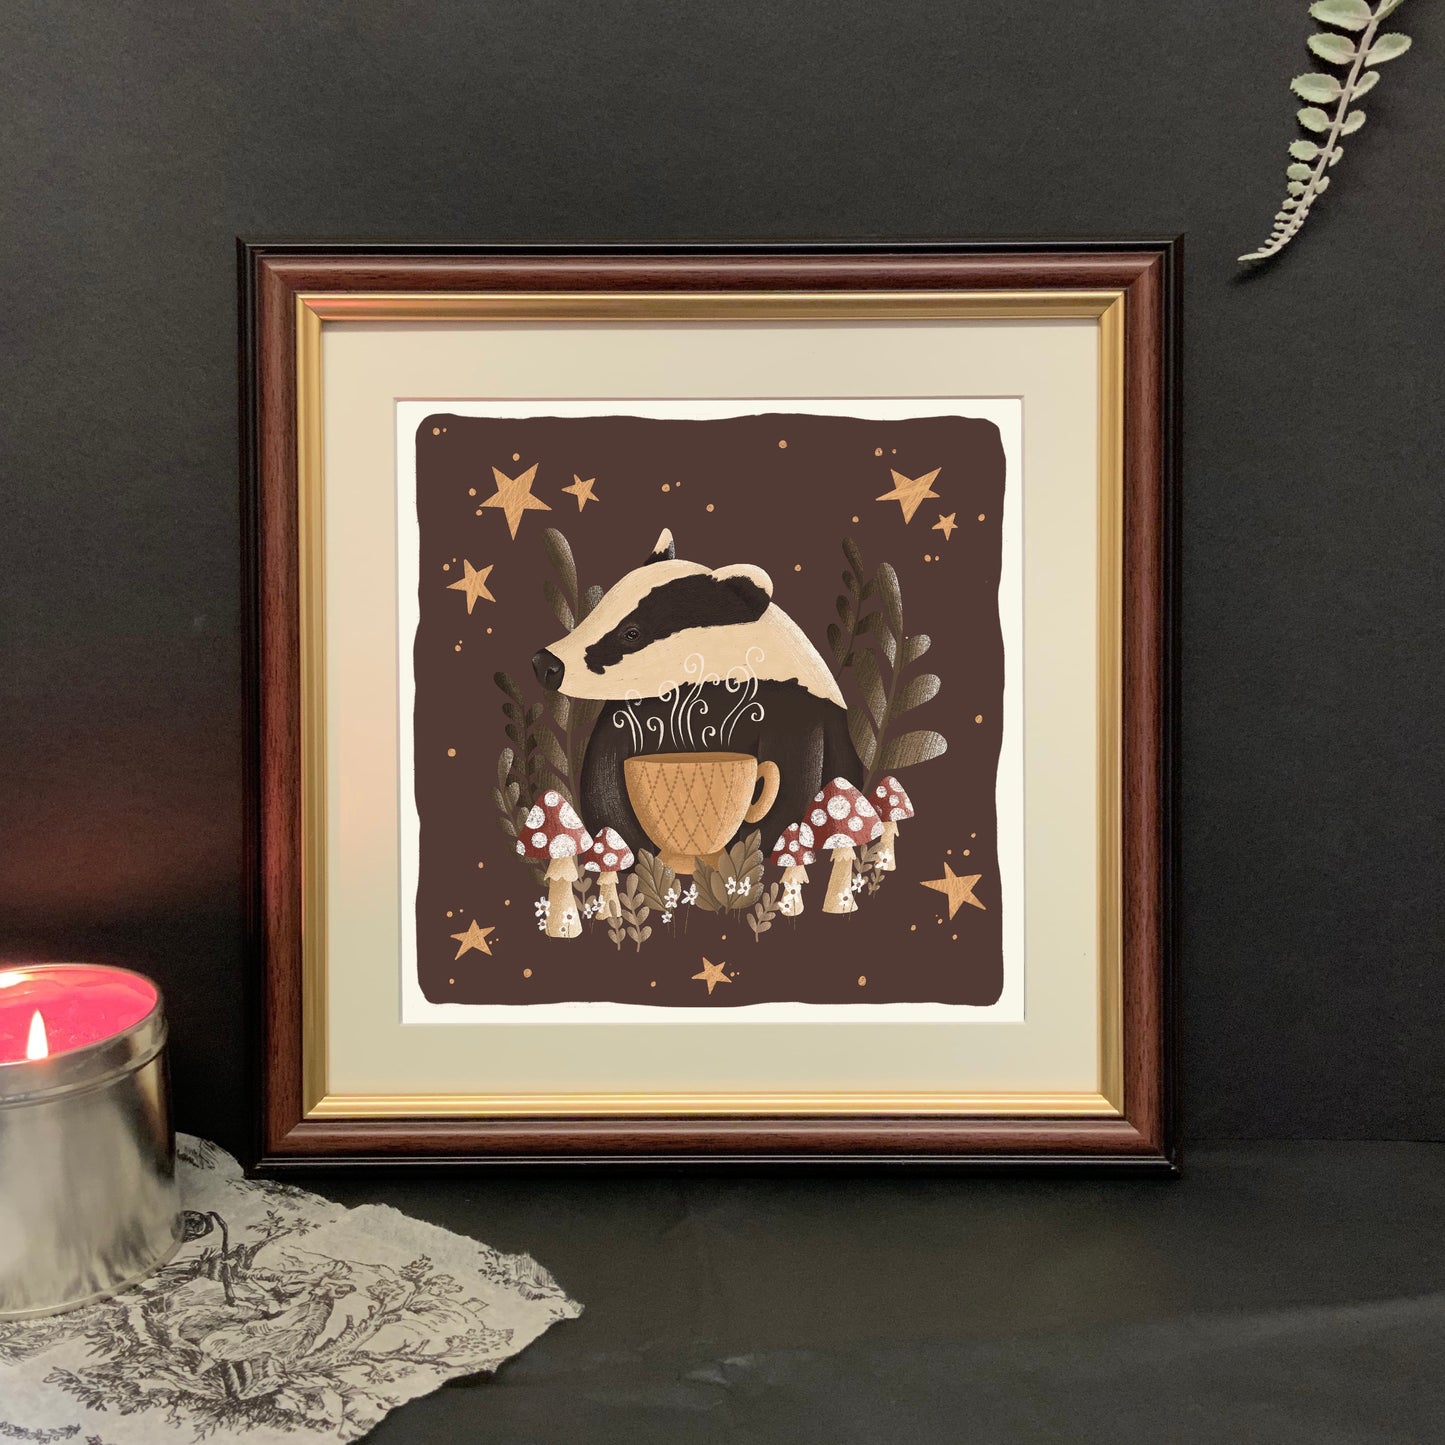 The badger and teacup art print